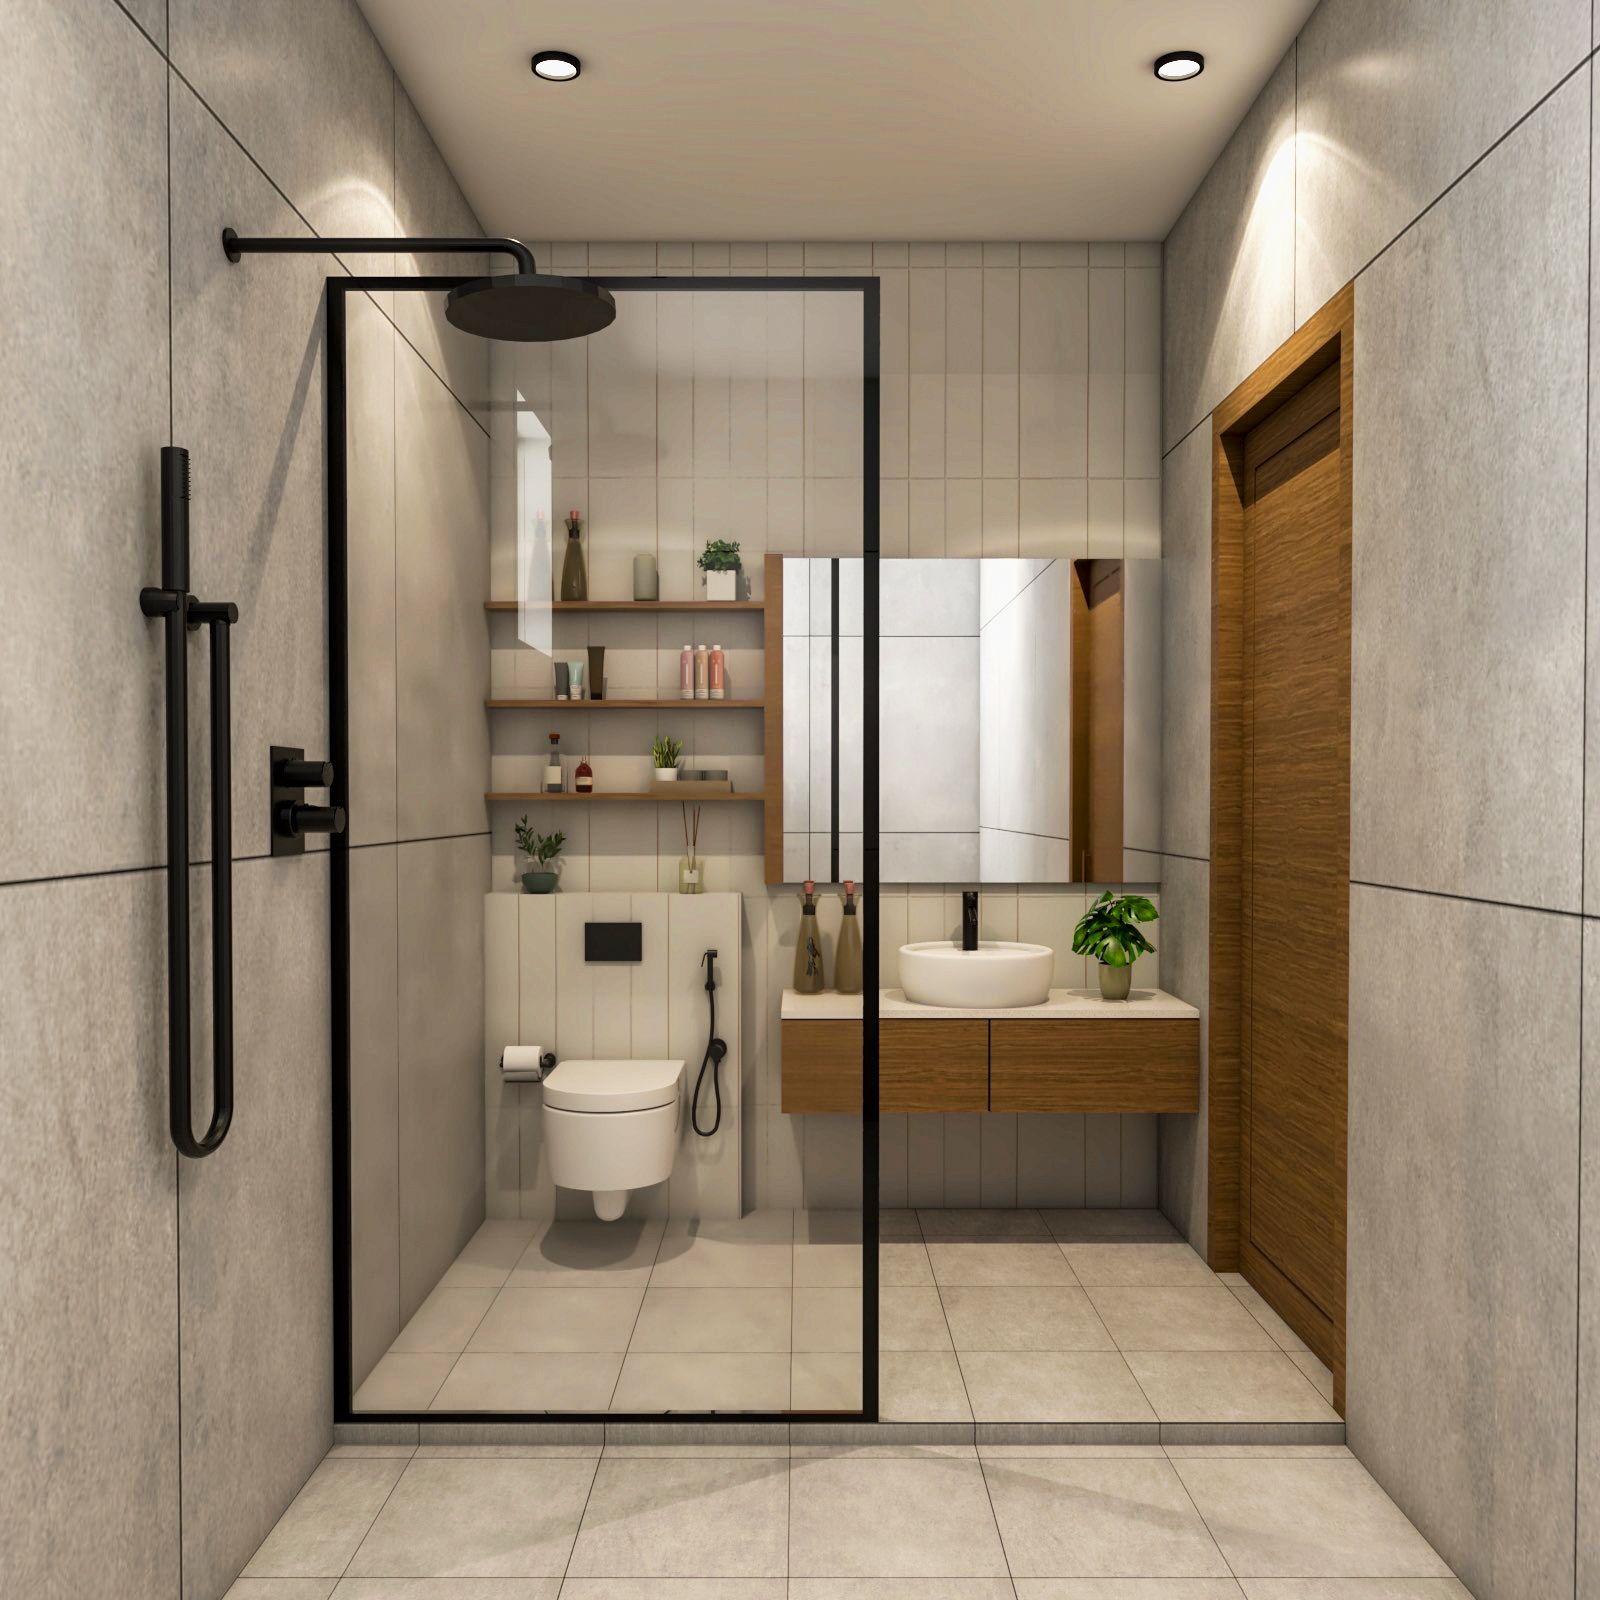 Contemporary Bathroom Design With Beige And Grey Tiles